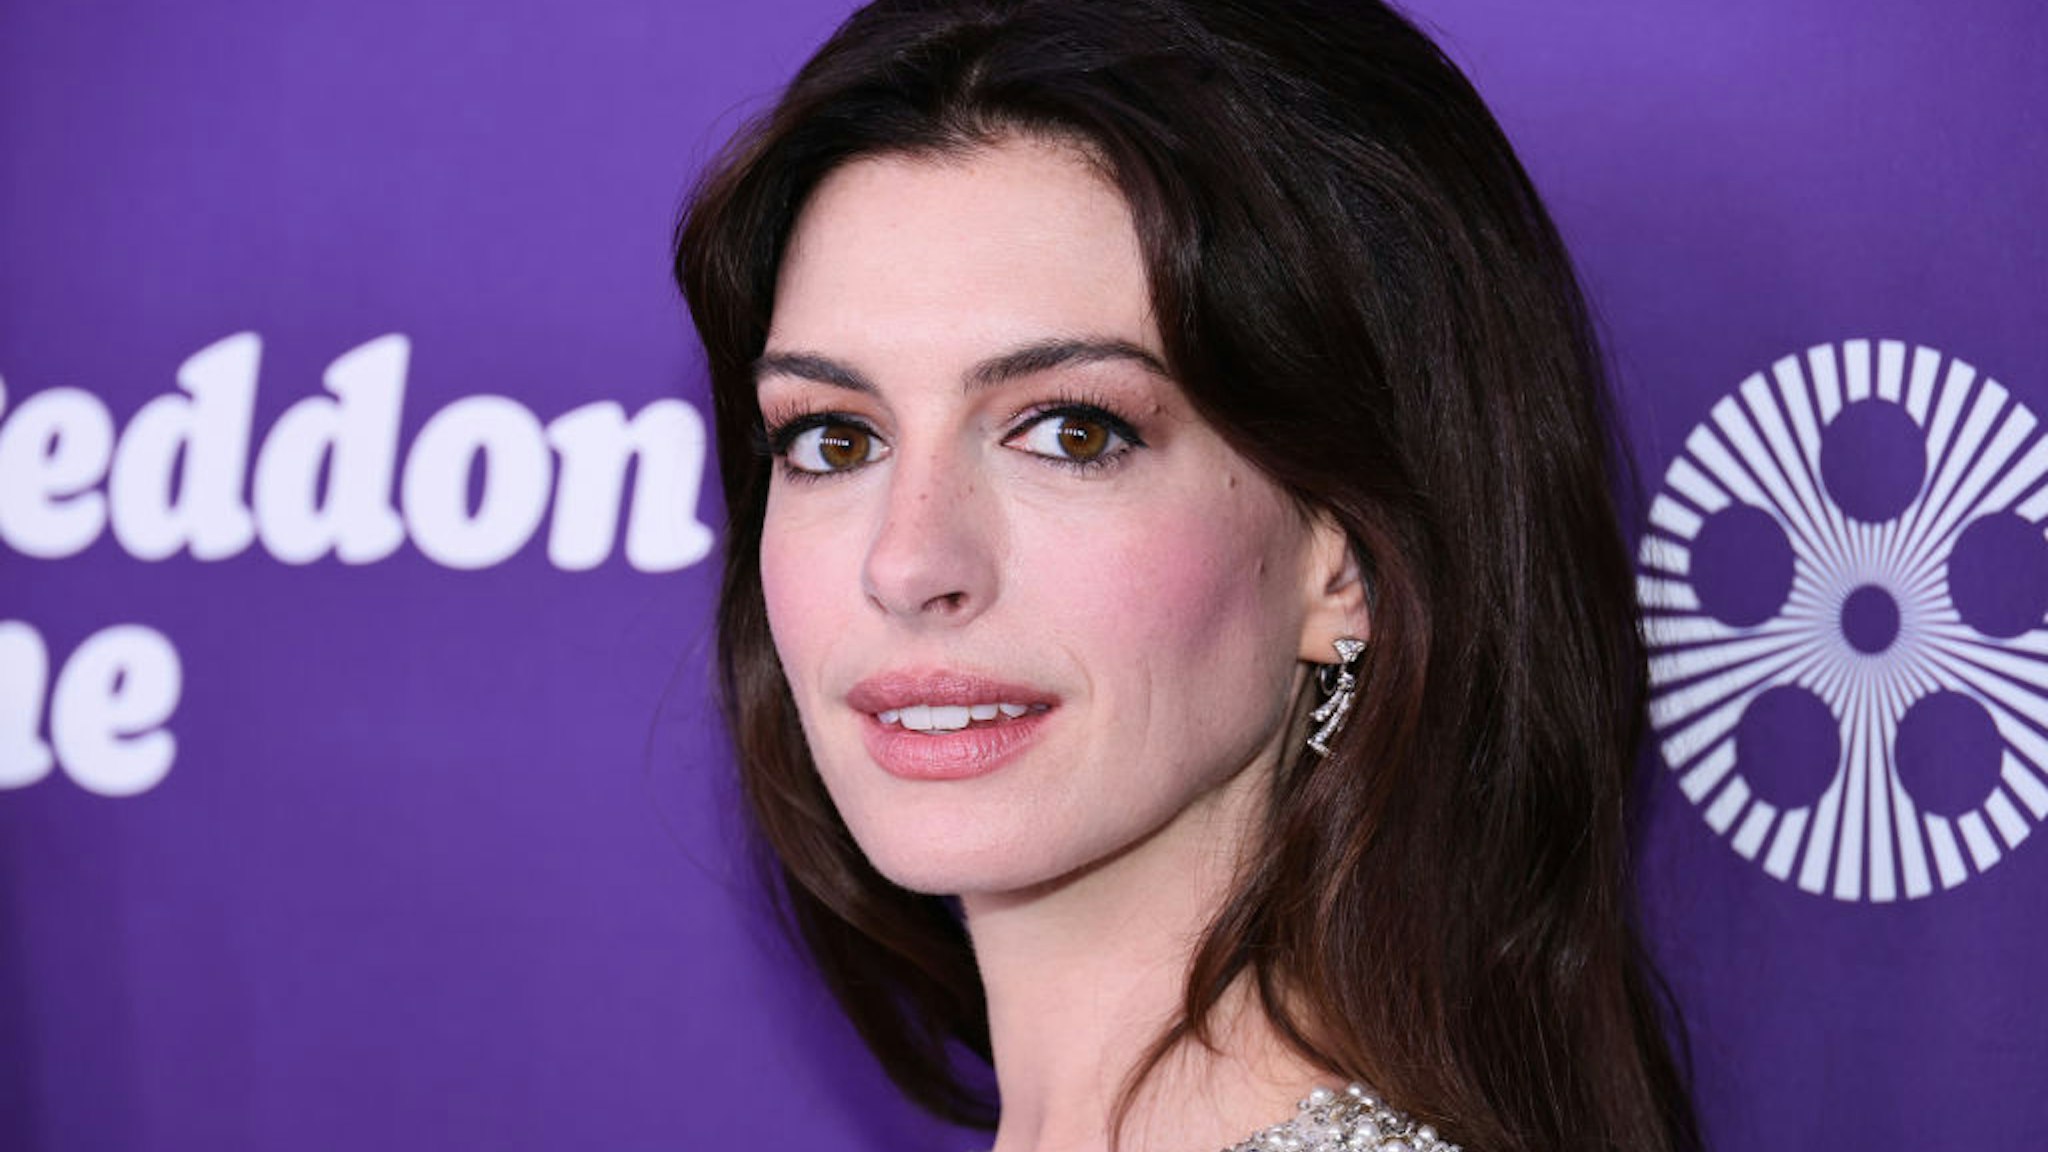 Anne Hathaway attends the red carpet event for "Armageddon Time" during the 60th New York Film Festival at Alice Tully Hall, Lincoln Center on October 12, 2022 in New York City.